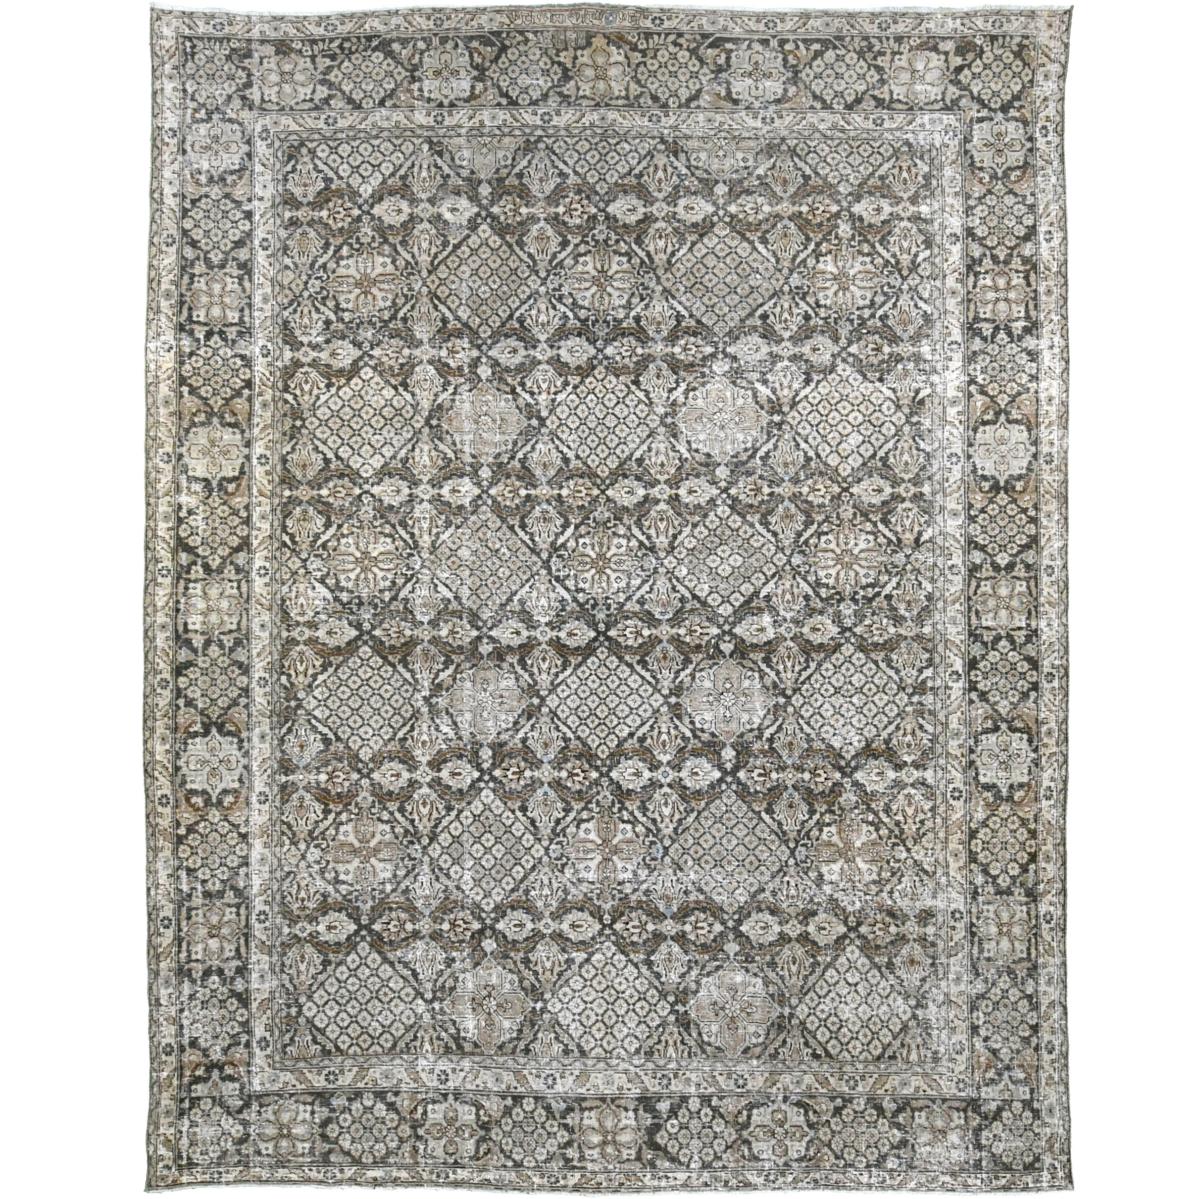 Circa: 1920’s

Dimensions: 9′ x 12′

Material: 100% Wool Pile, Hand Knotted

Design: Persian, Tabriz Weave, Traditional Design

17839

Persian rugs and carpets of various types were woven in parallel by nomadic tribes in village and town workshops,